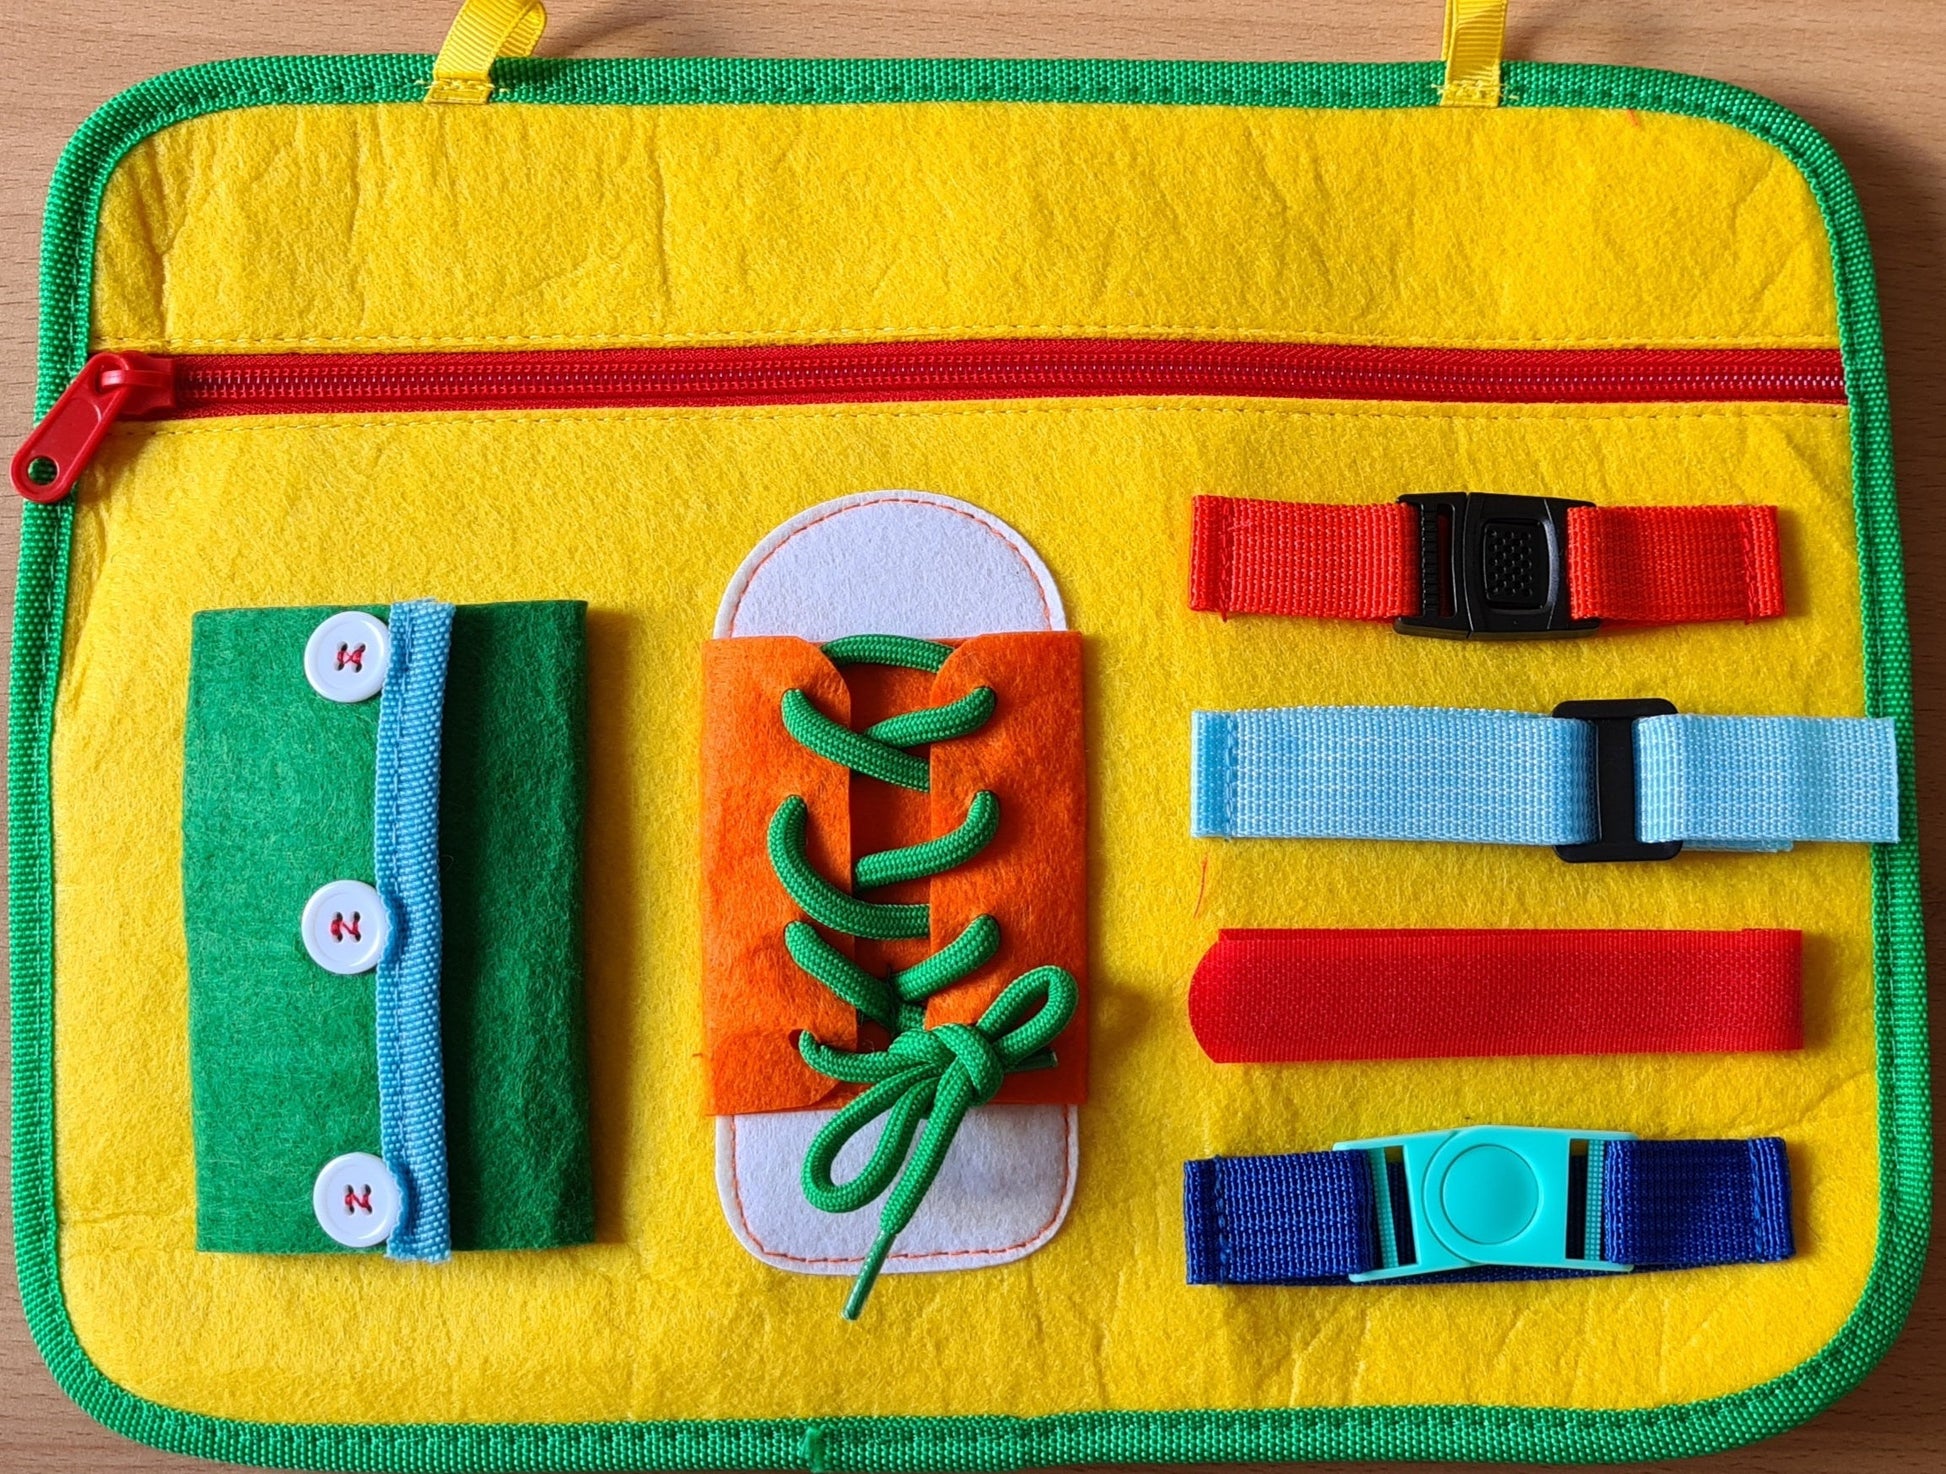 Zip pocket, shoe lace, buttons and buckle activity